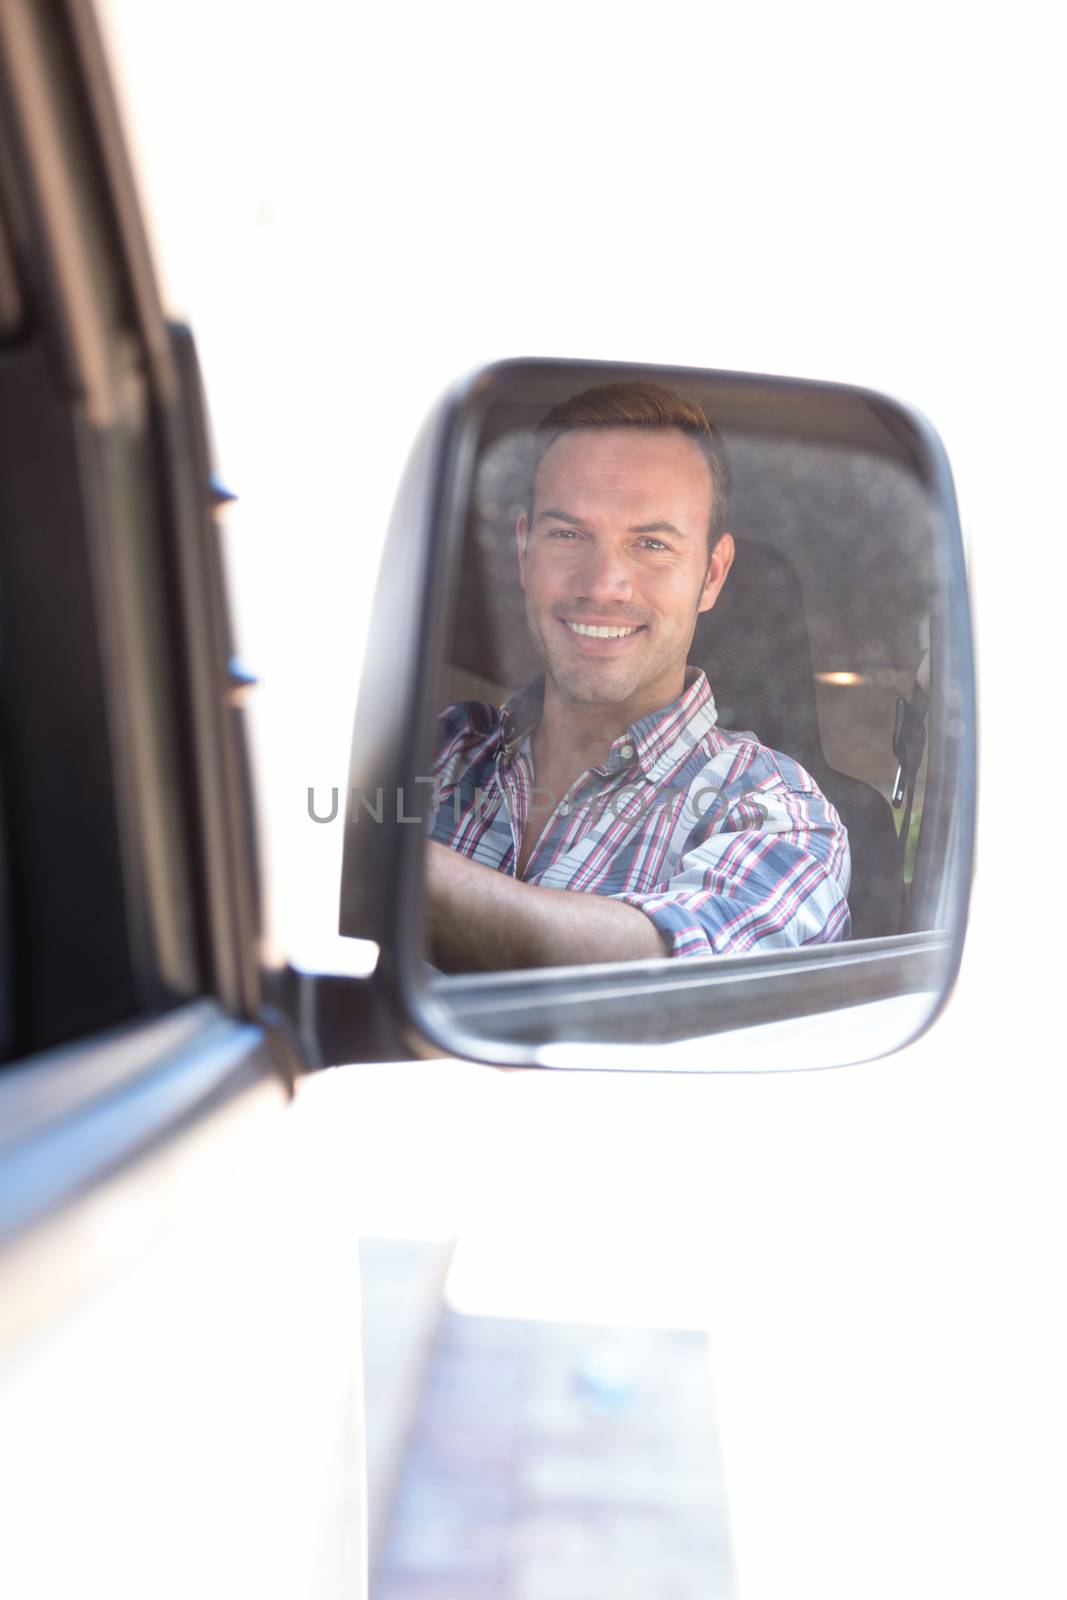 Young man driving with his reflection in rear view mirror by Wavebreakmedia